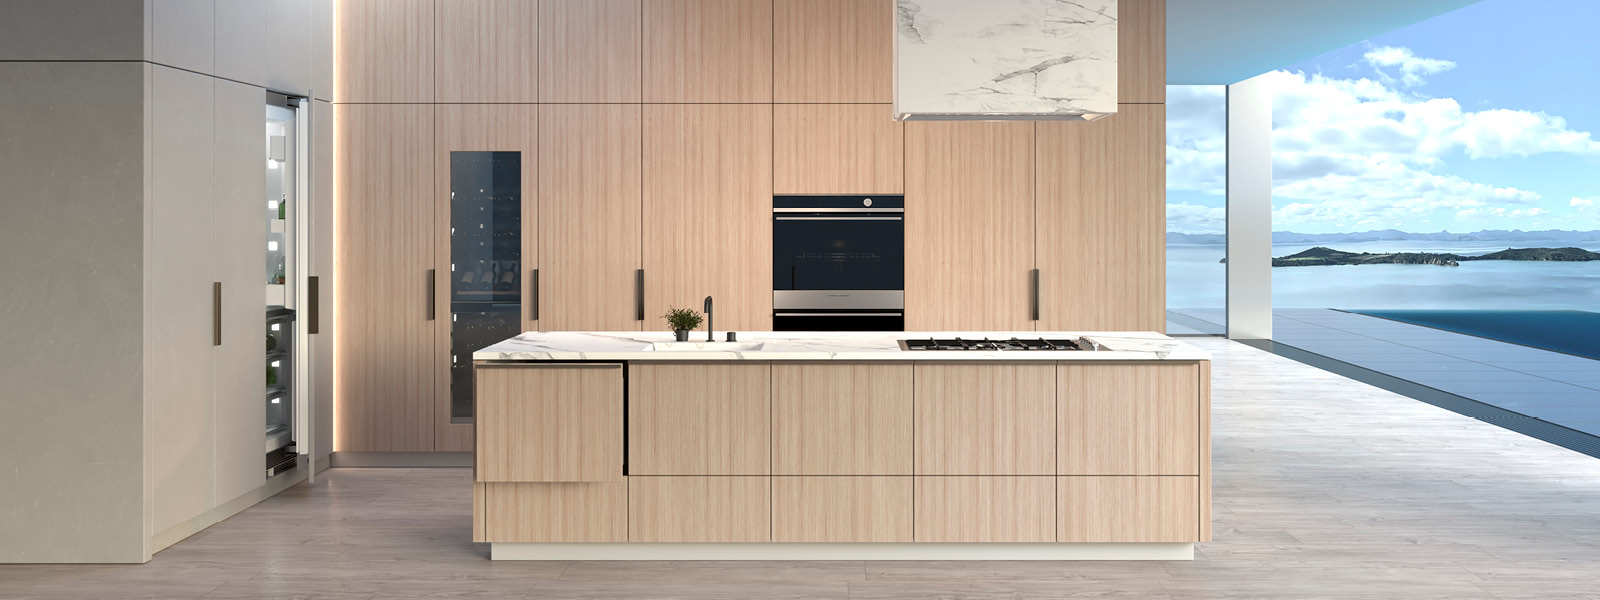 15% Cashback* On Qualifying Fisher & Paykel Kitchen Appliance Purchases at Hart & Co